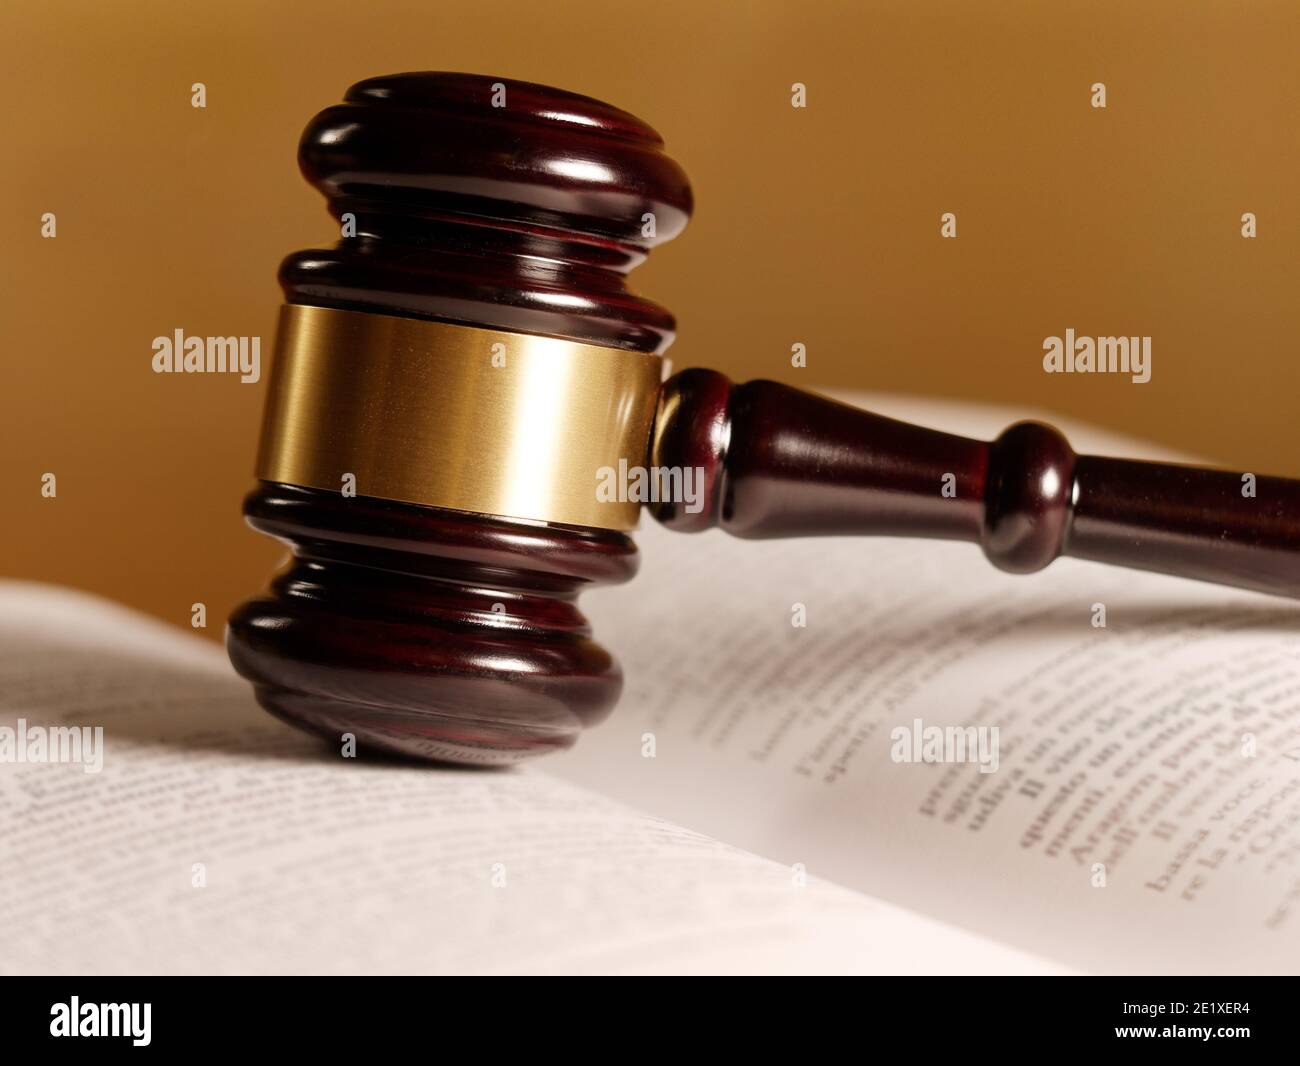 Opened juridical books with hammer on wooden table, law concept Stock Photo